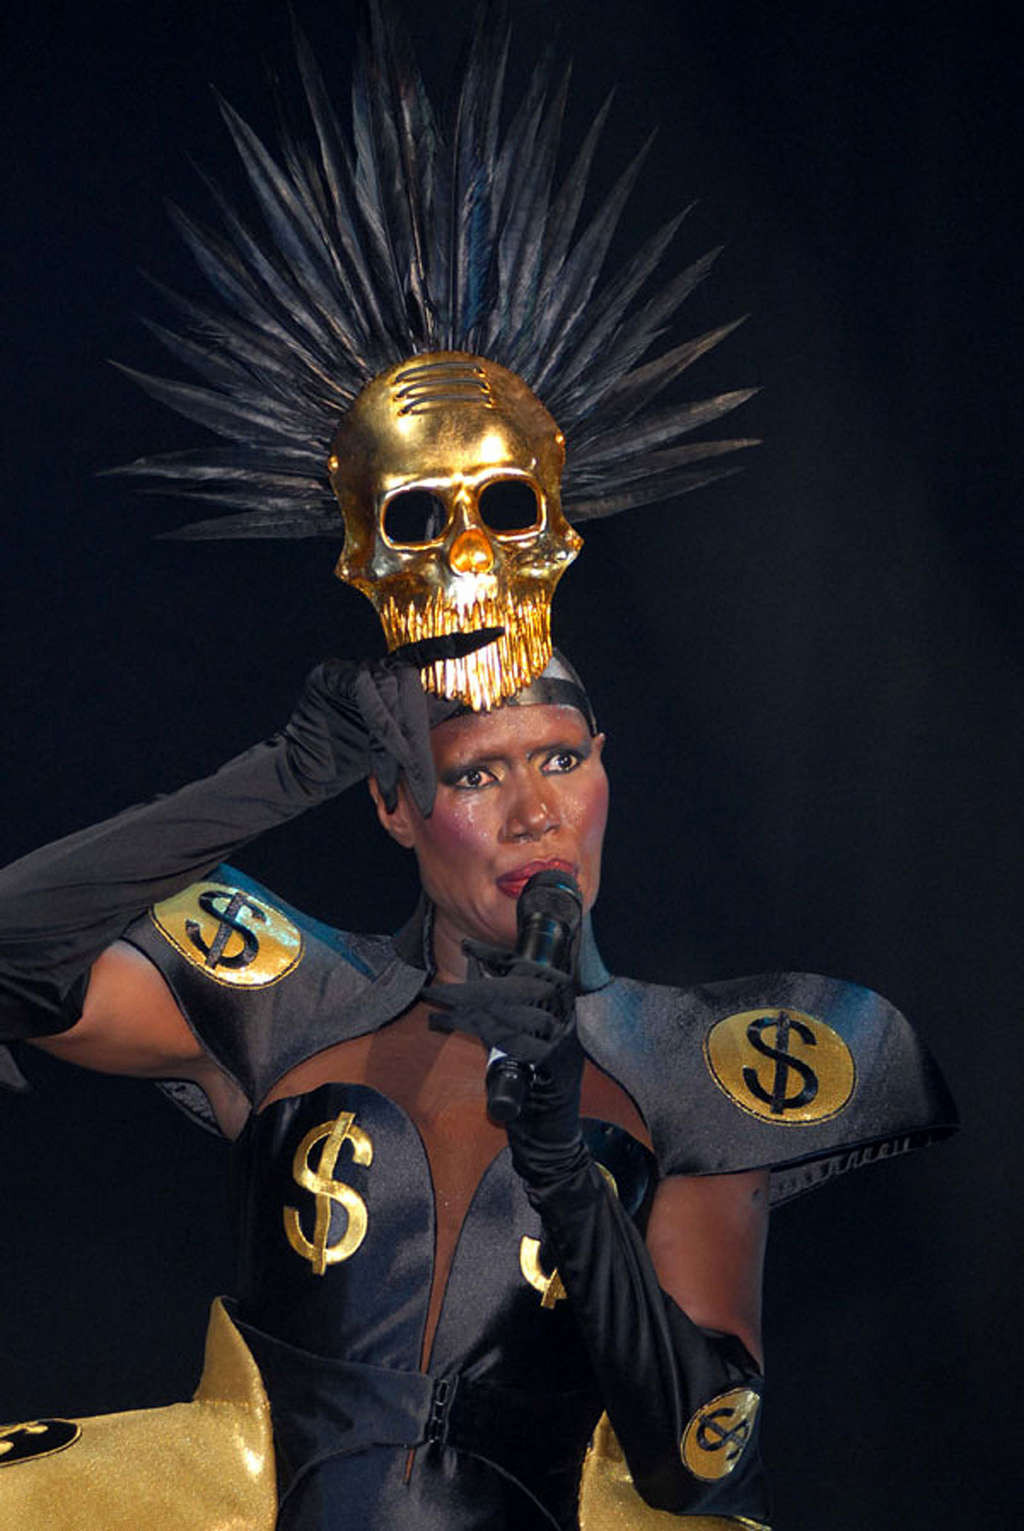 Grace Jones tits slip and upskirt on stage paparazzi pictures #75359734